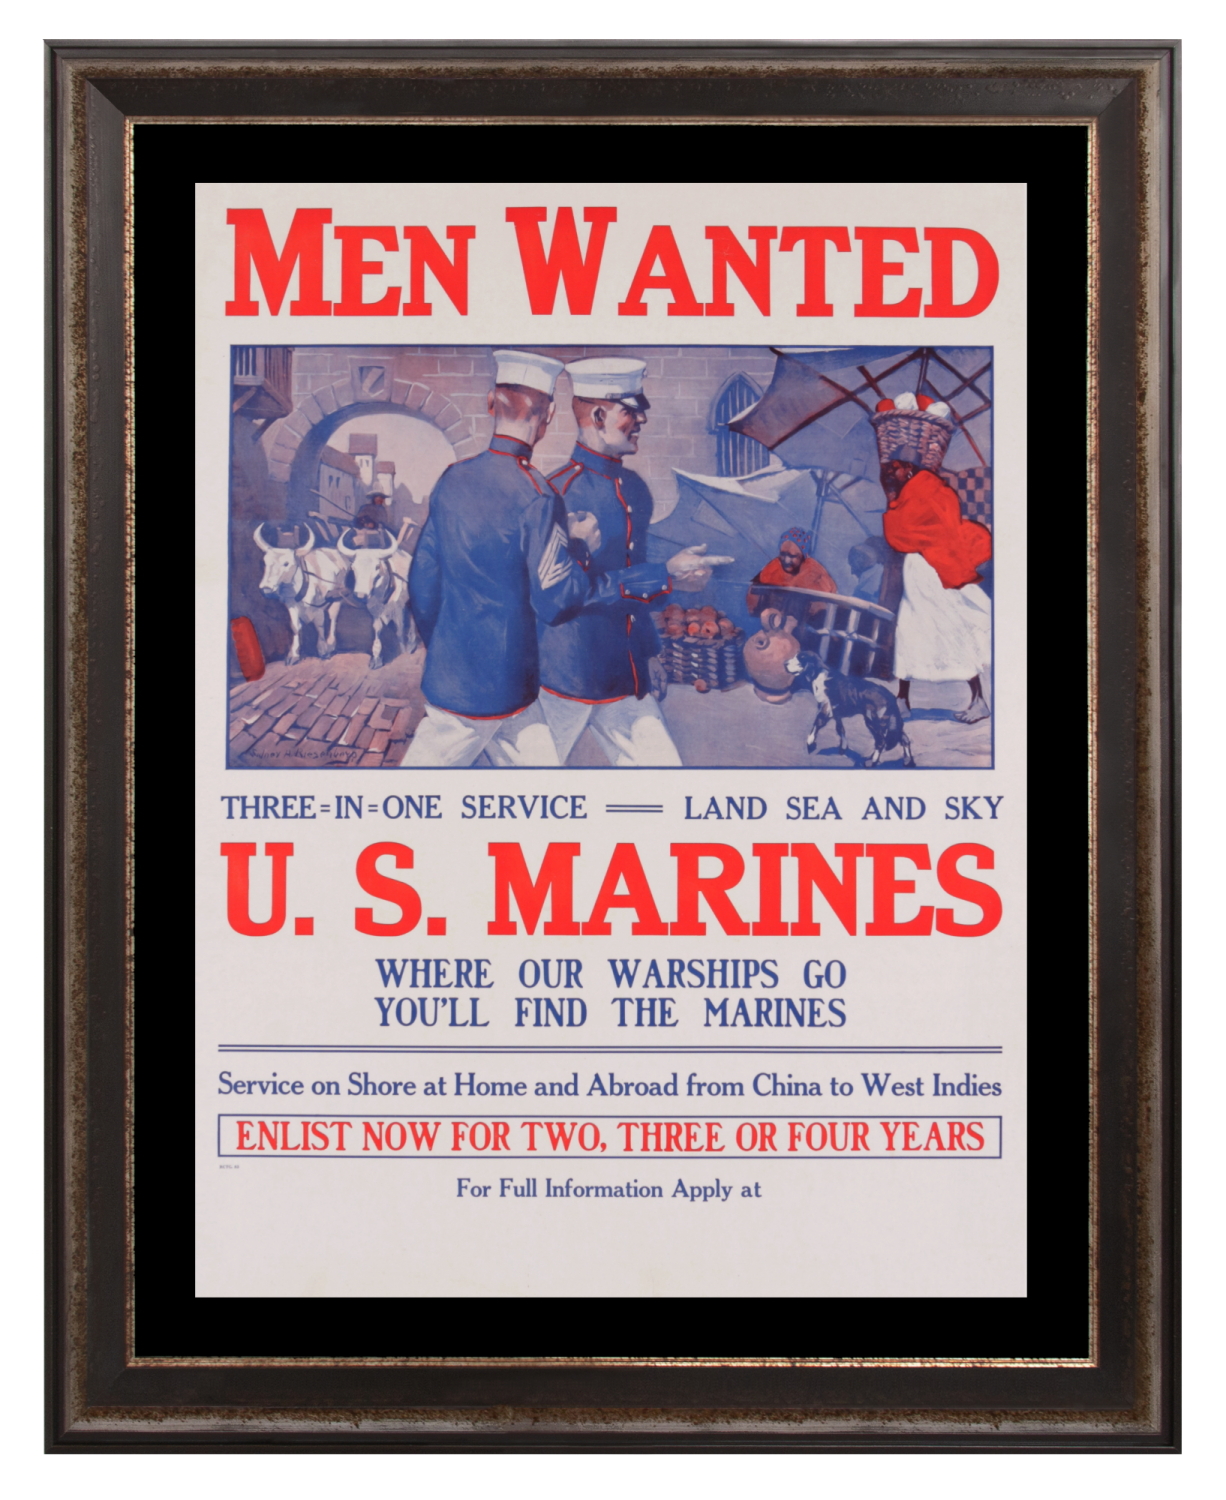 EXTRAORDINARY MARINE CORPS RECRUITMENT POSTER BY SIDNEY RIESENBERG (1885-1971), WITH SHARPLY APPOINTED OFFICERS STROLLING IN AN EXOTIC LOCAL, POSSIBLY MARRAKESH; NO OTHER COPIES PRESENTLY KNOWN; UNLISTED IN THE LIBRARY OF CONGRESS, PRE-FIRST WORLD WAR